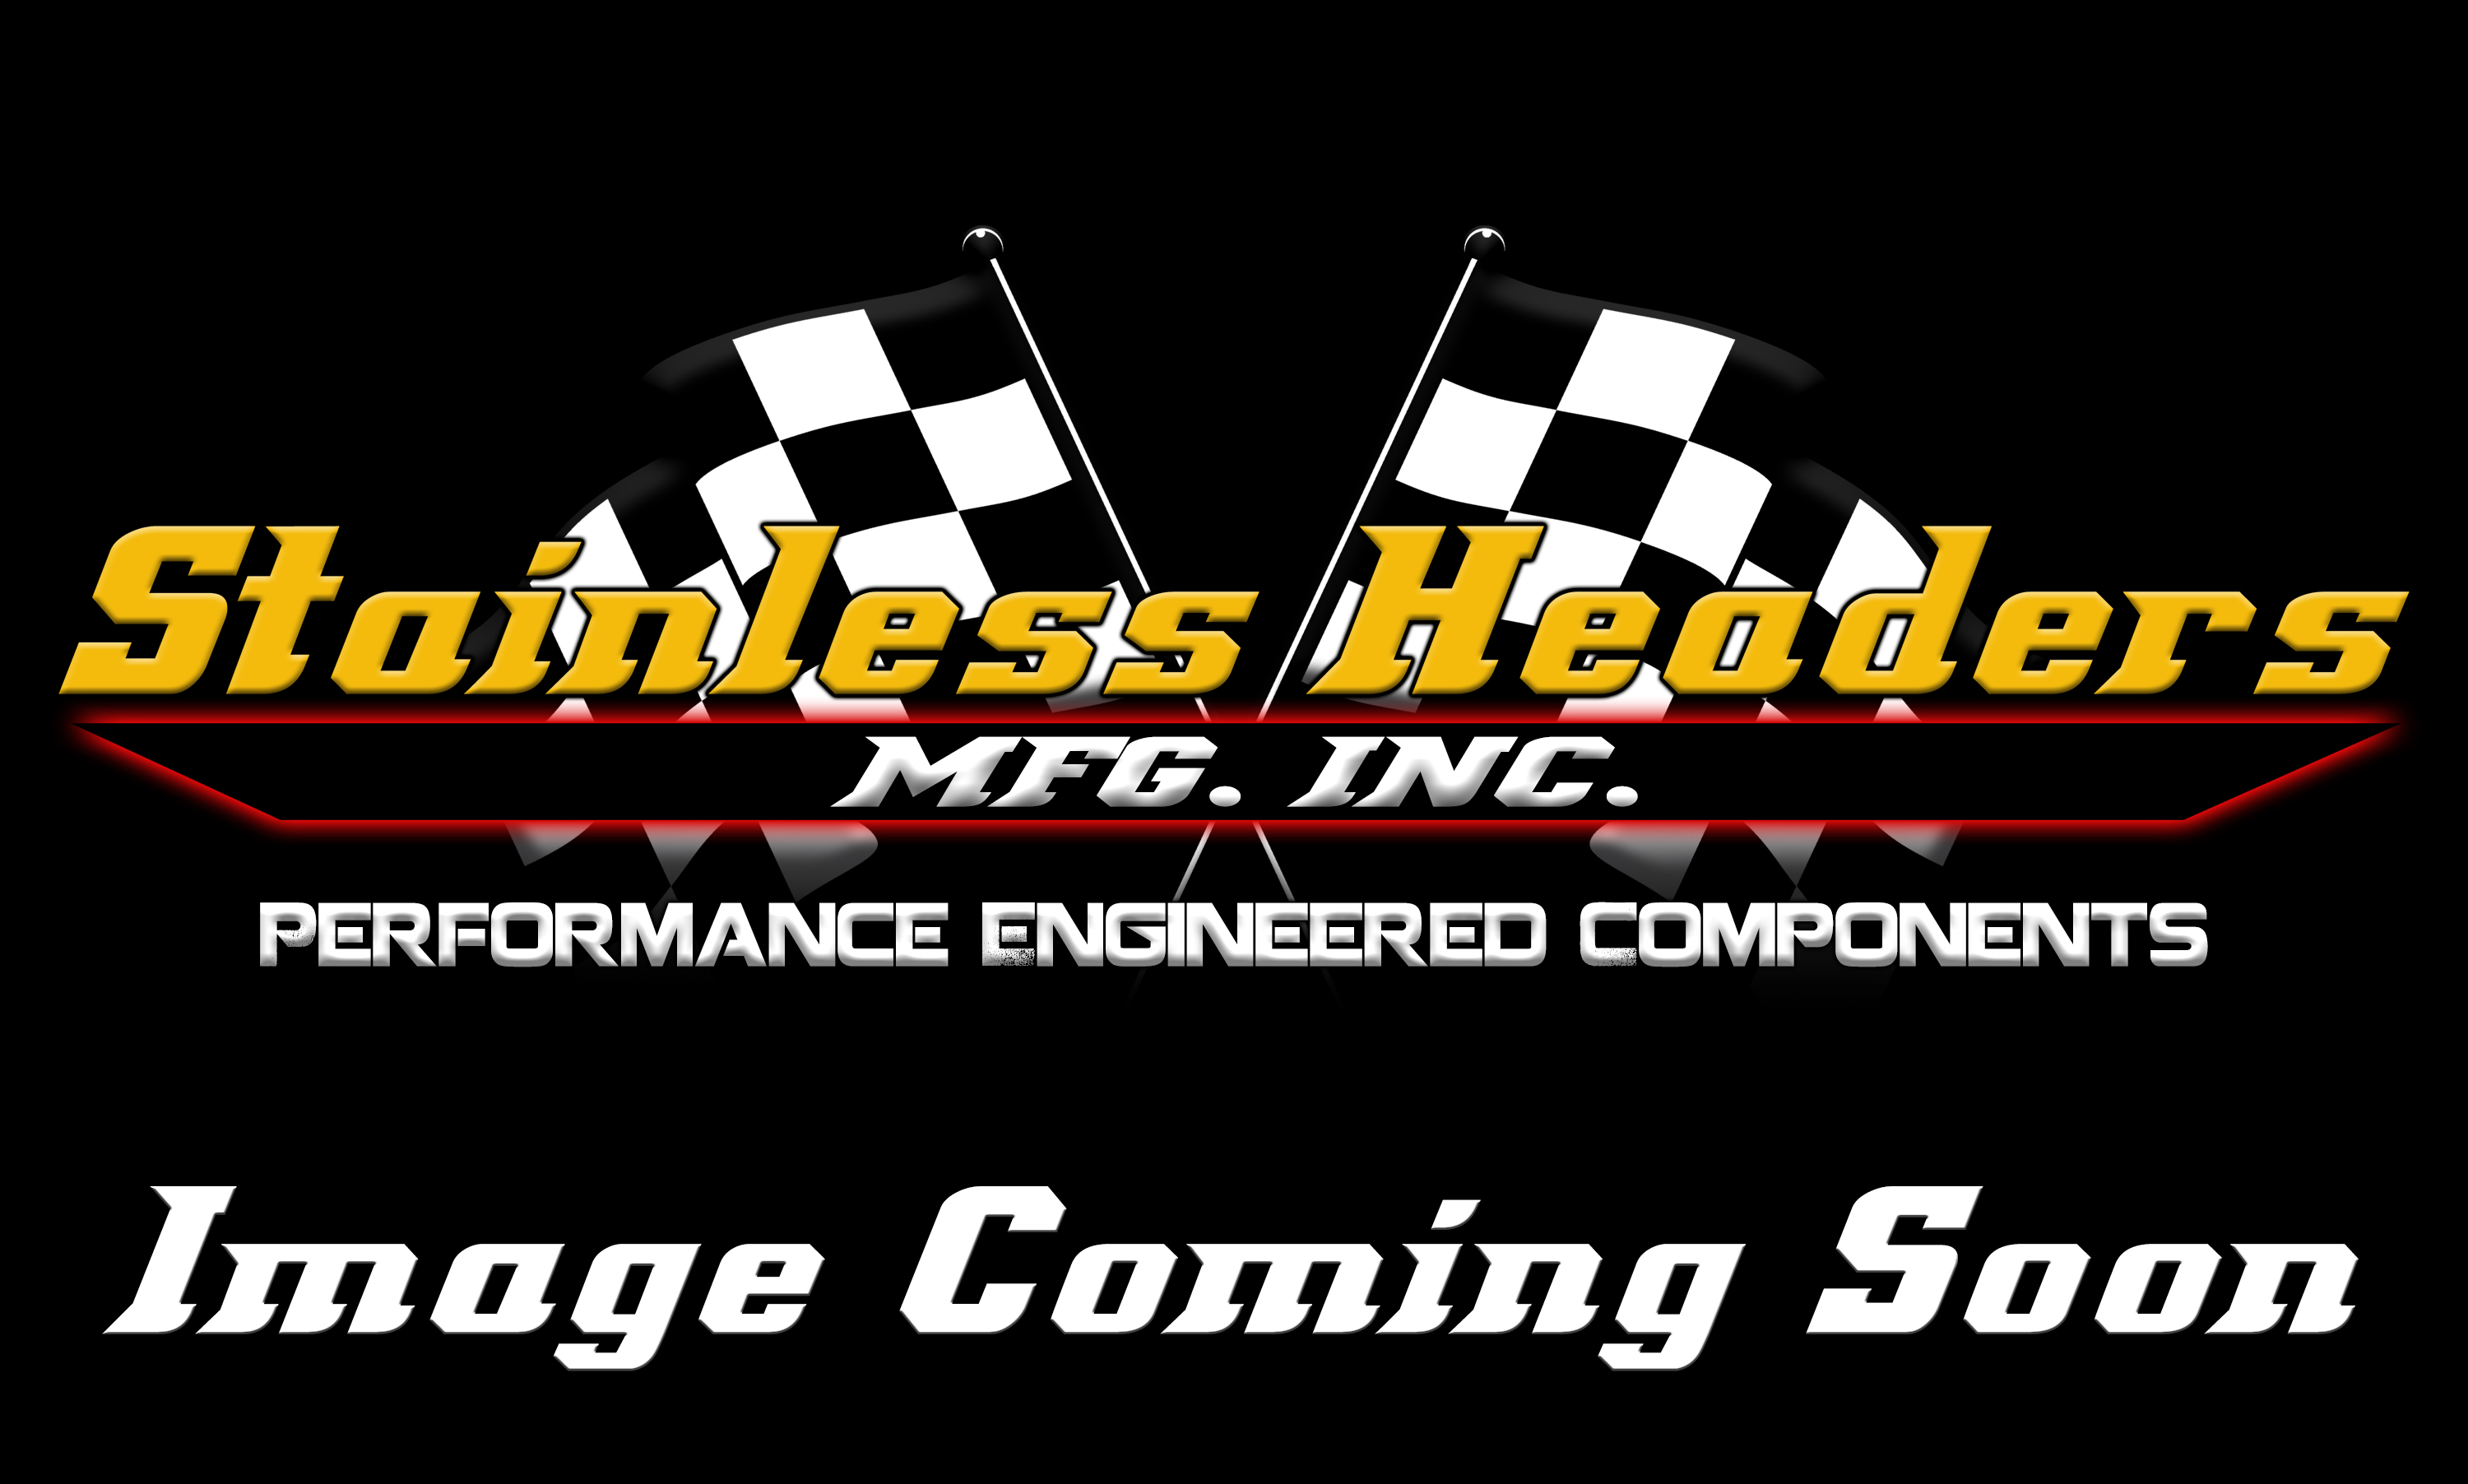 Stainless Headers - Vortec 4200 Side-Mount Turbo Manifold Build Kit